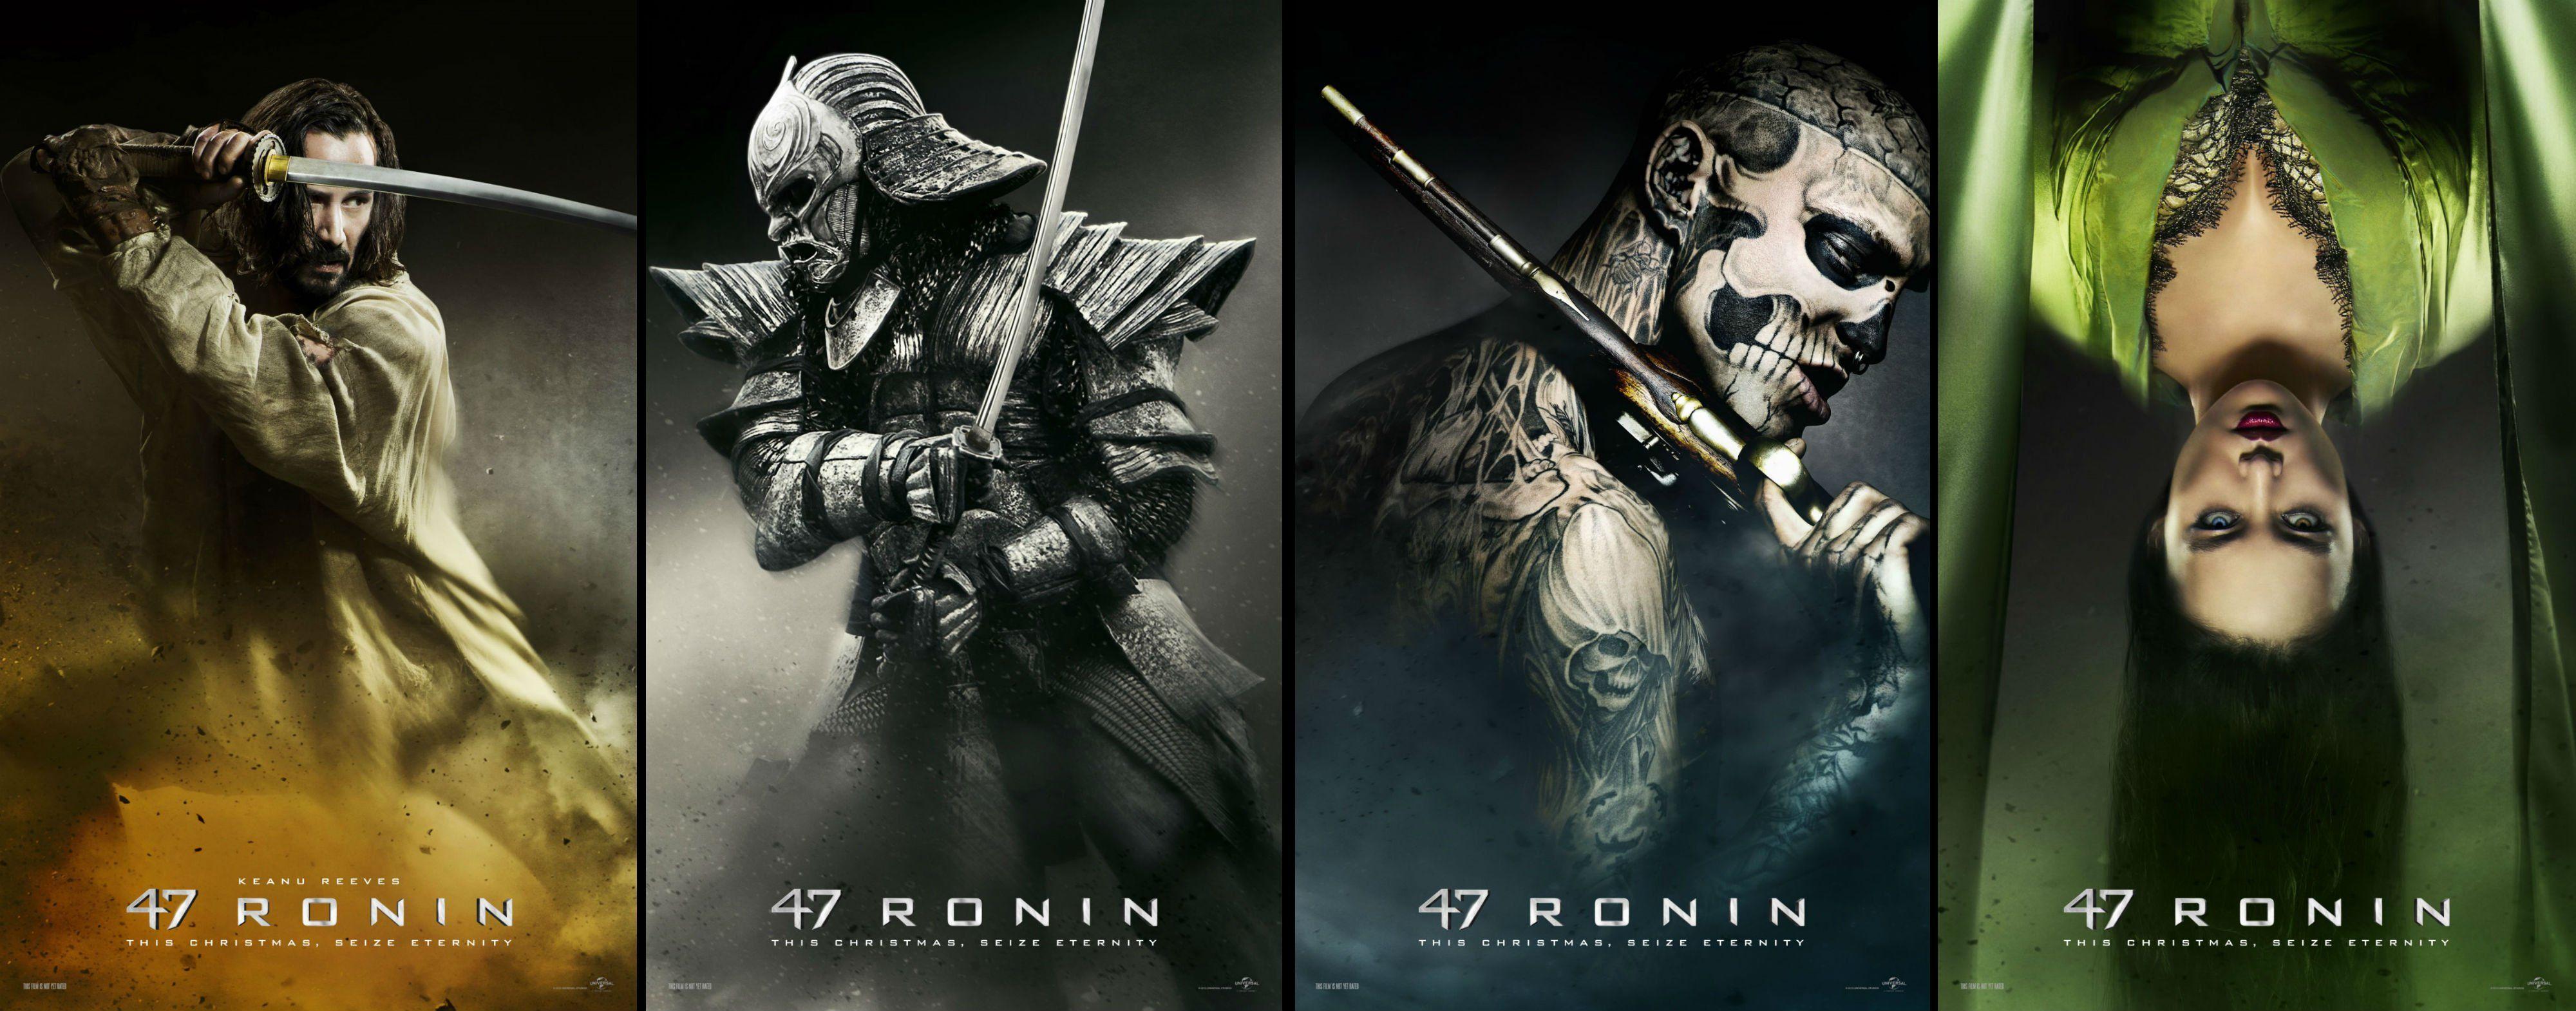 Ronin Wallpapers